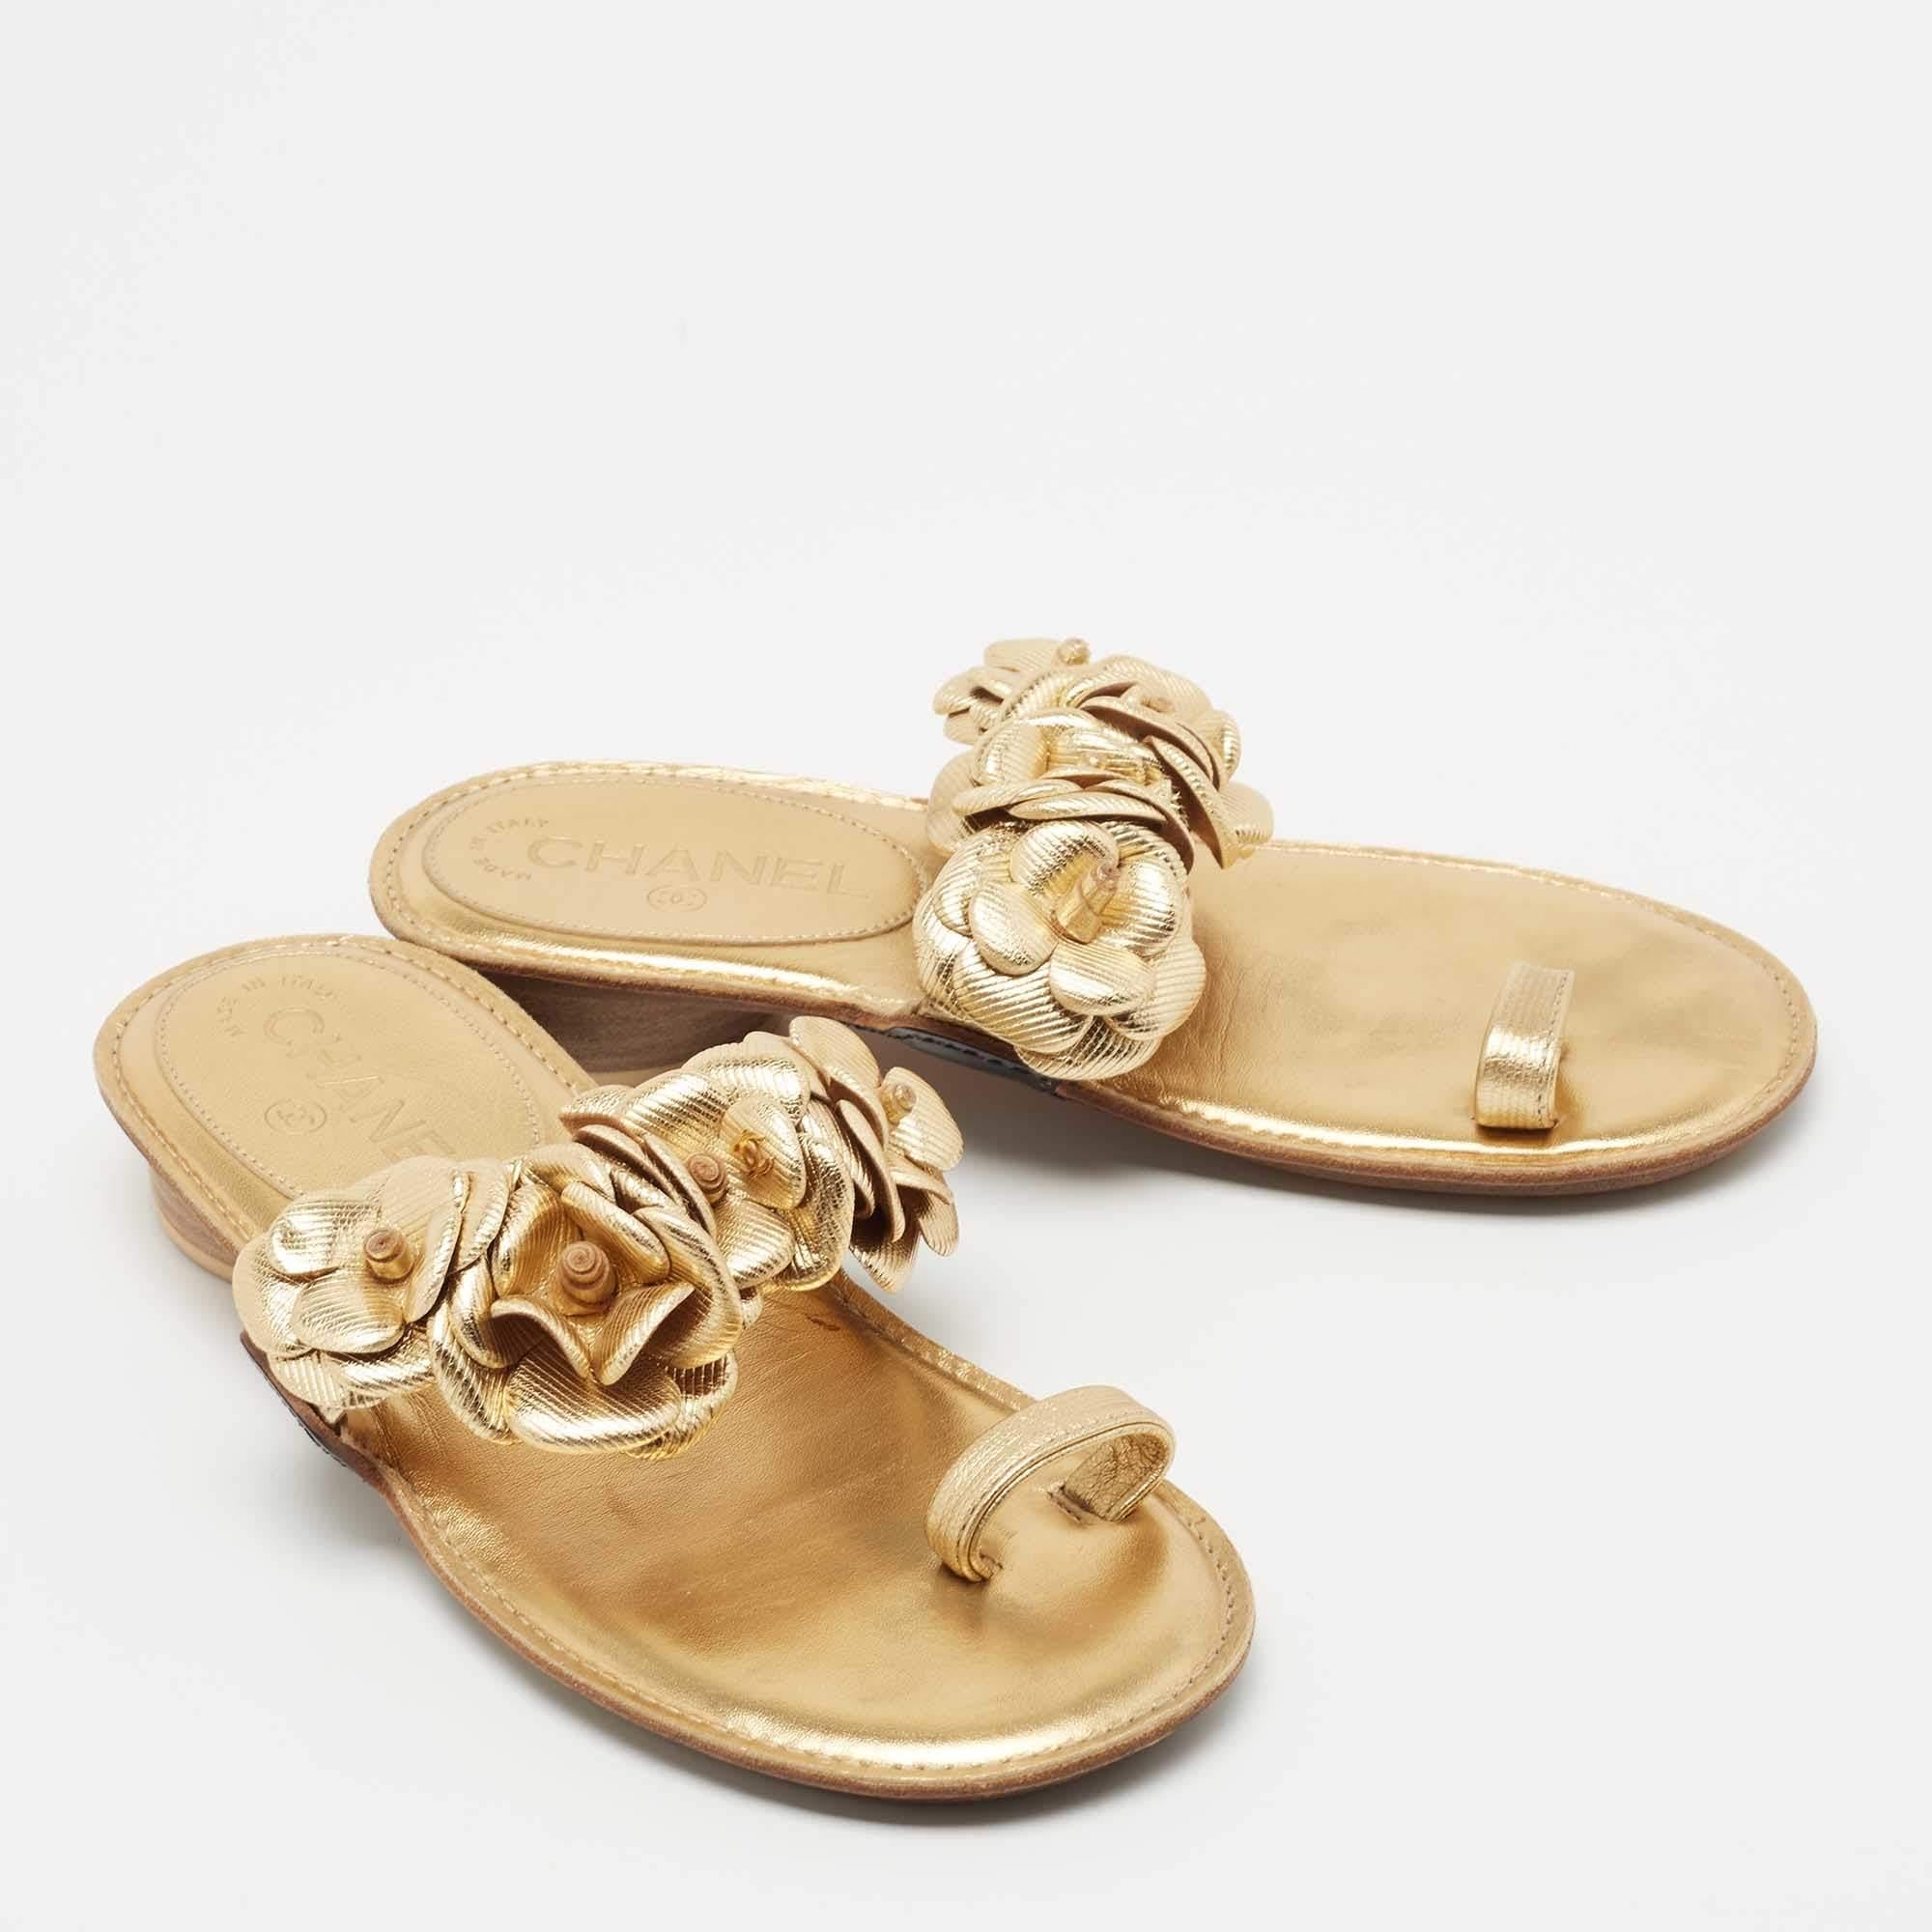 Chanel Gold Leather Camellia Toe Ring Sandals Size 36 1